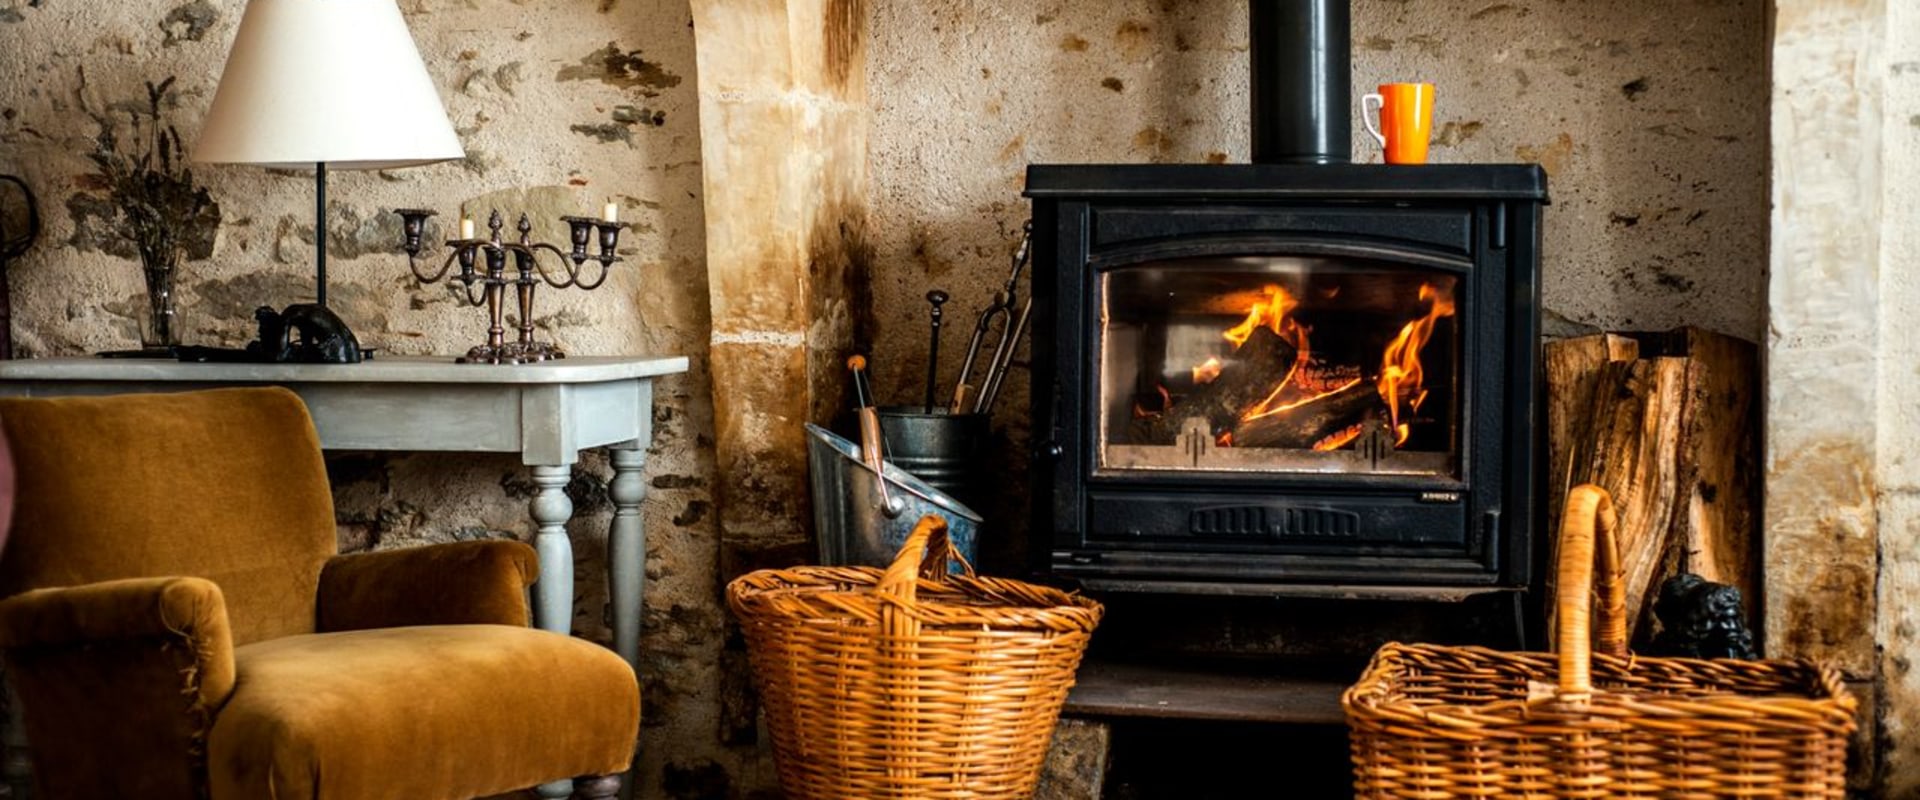 Which heats better wood stove or fireplace?